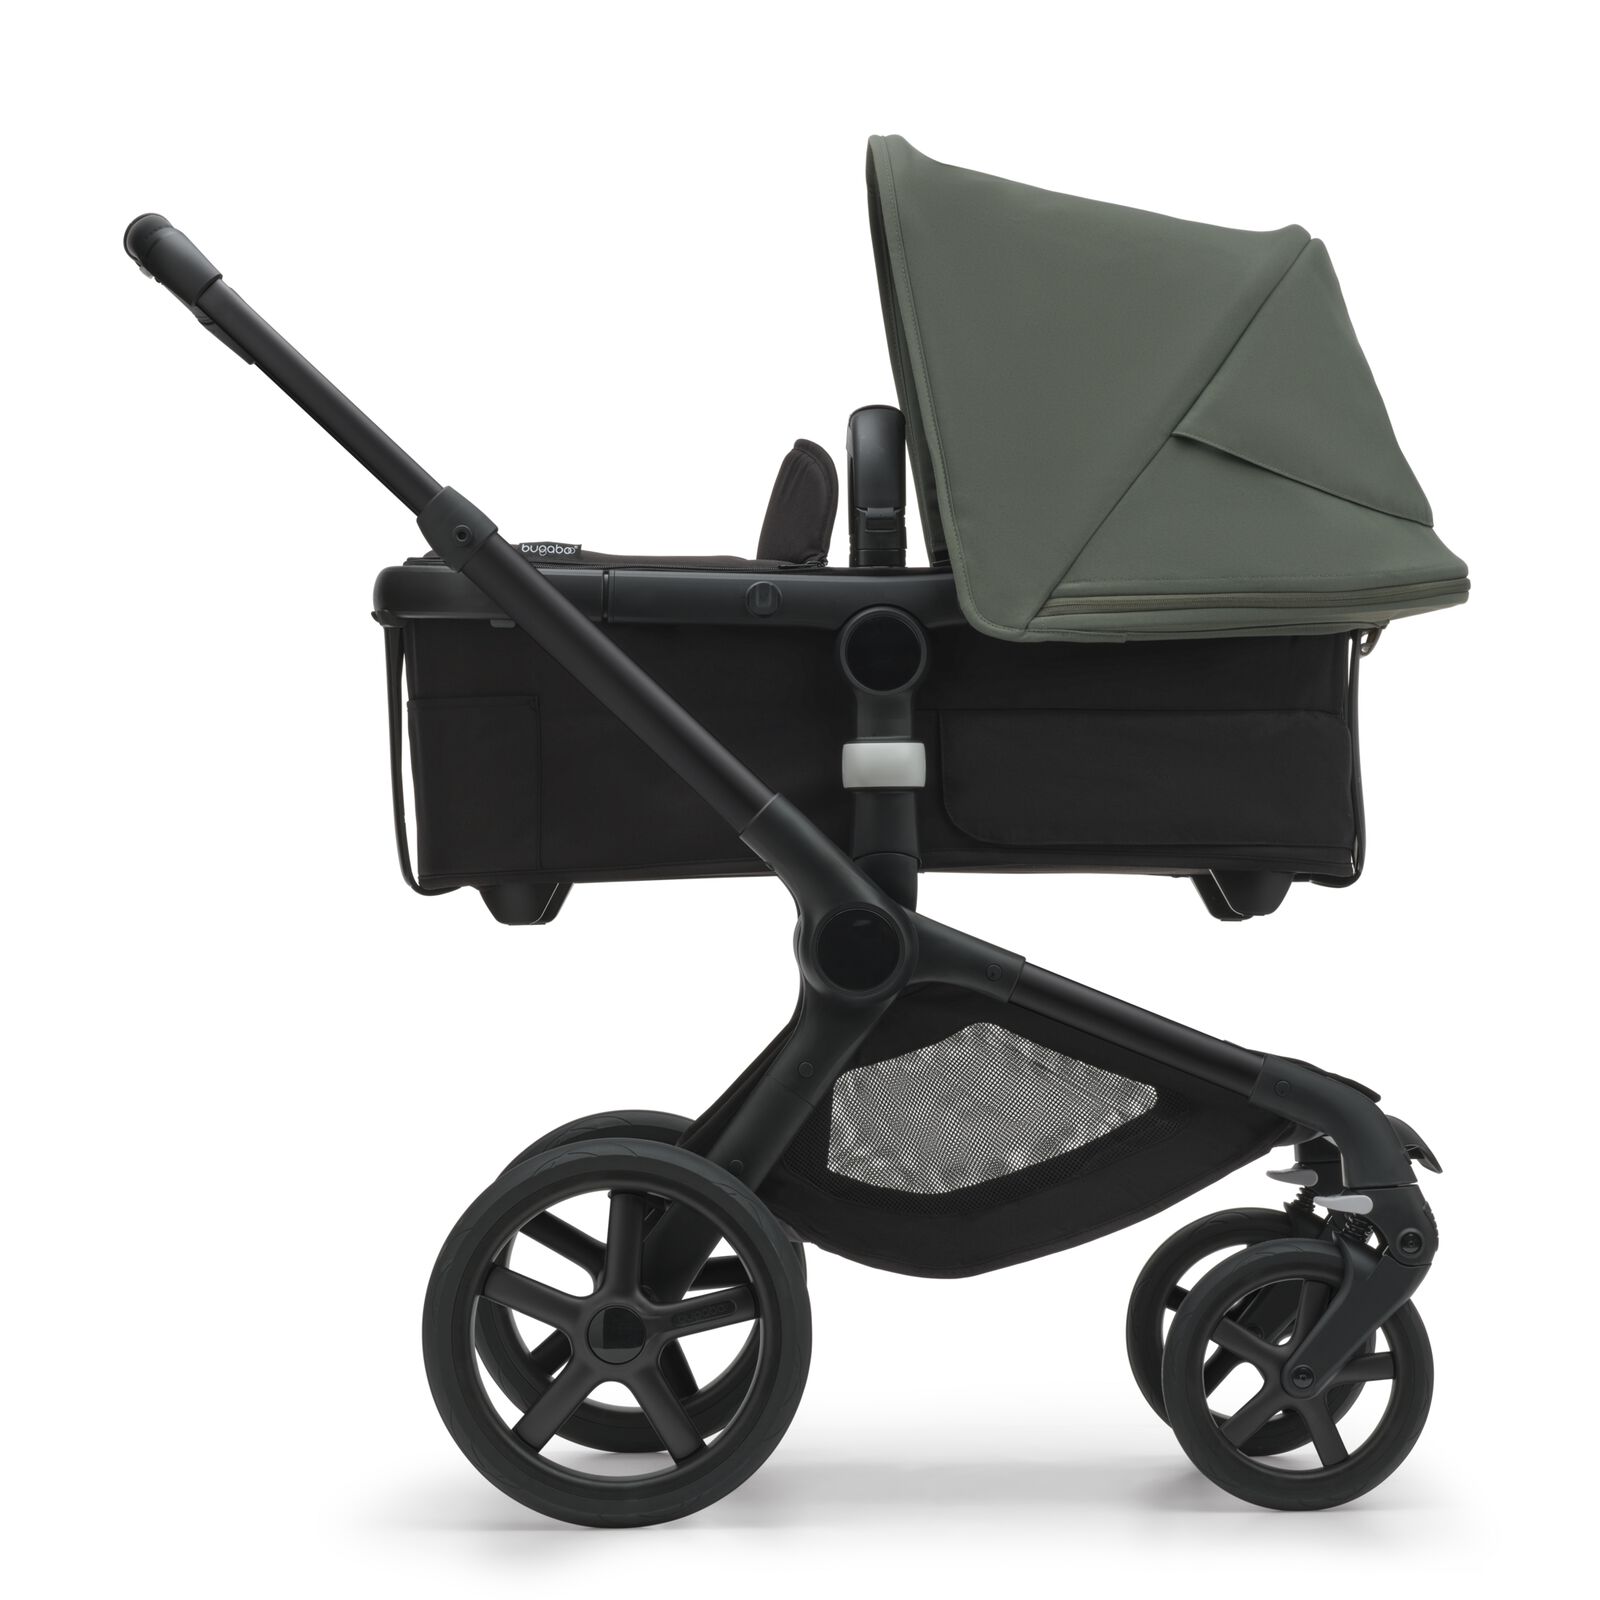 Side view of the Bugaboo Fox 5 bassinet stroller with black chassis, midnight black fabrics and forest green sun canopy.